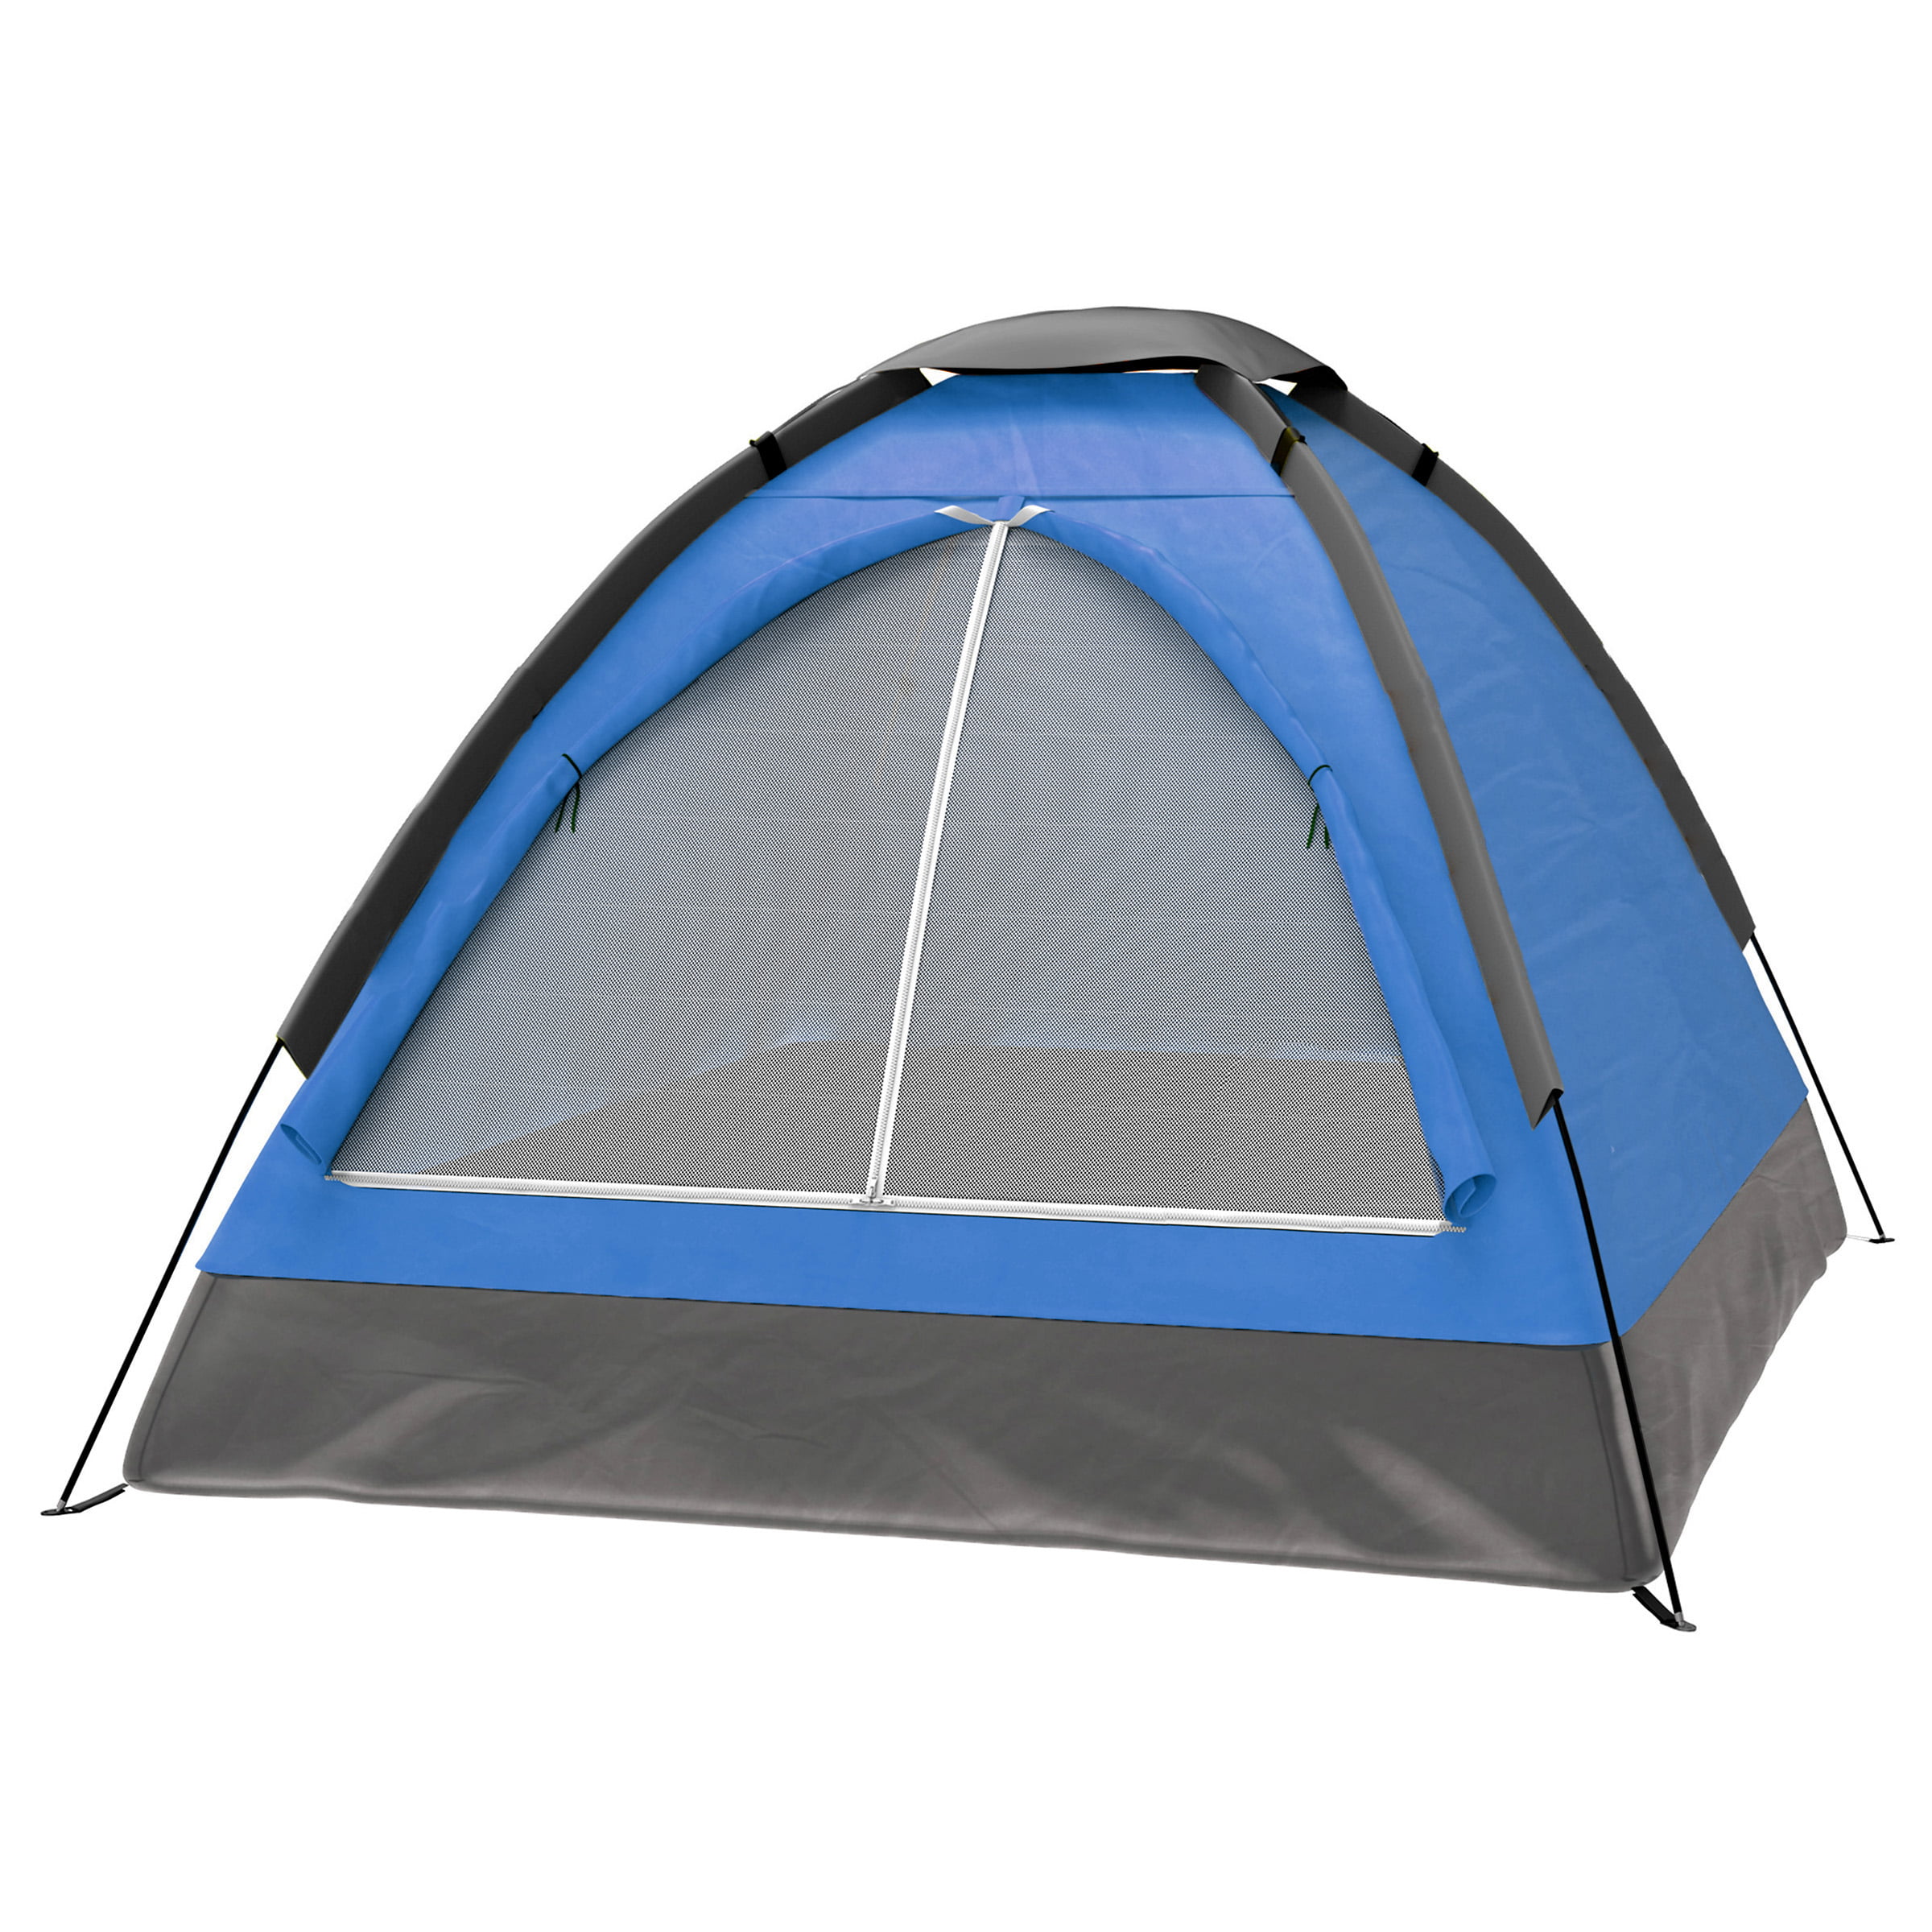 Lightweight 2 Person Camping Tent with Rain Fly